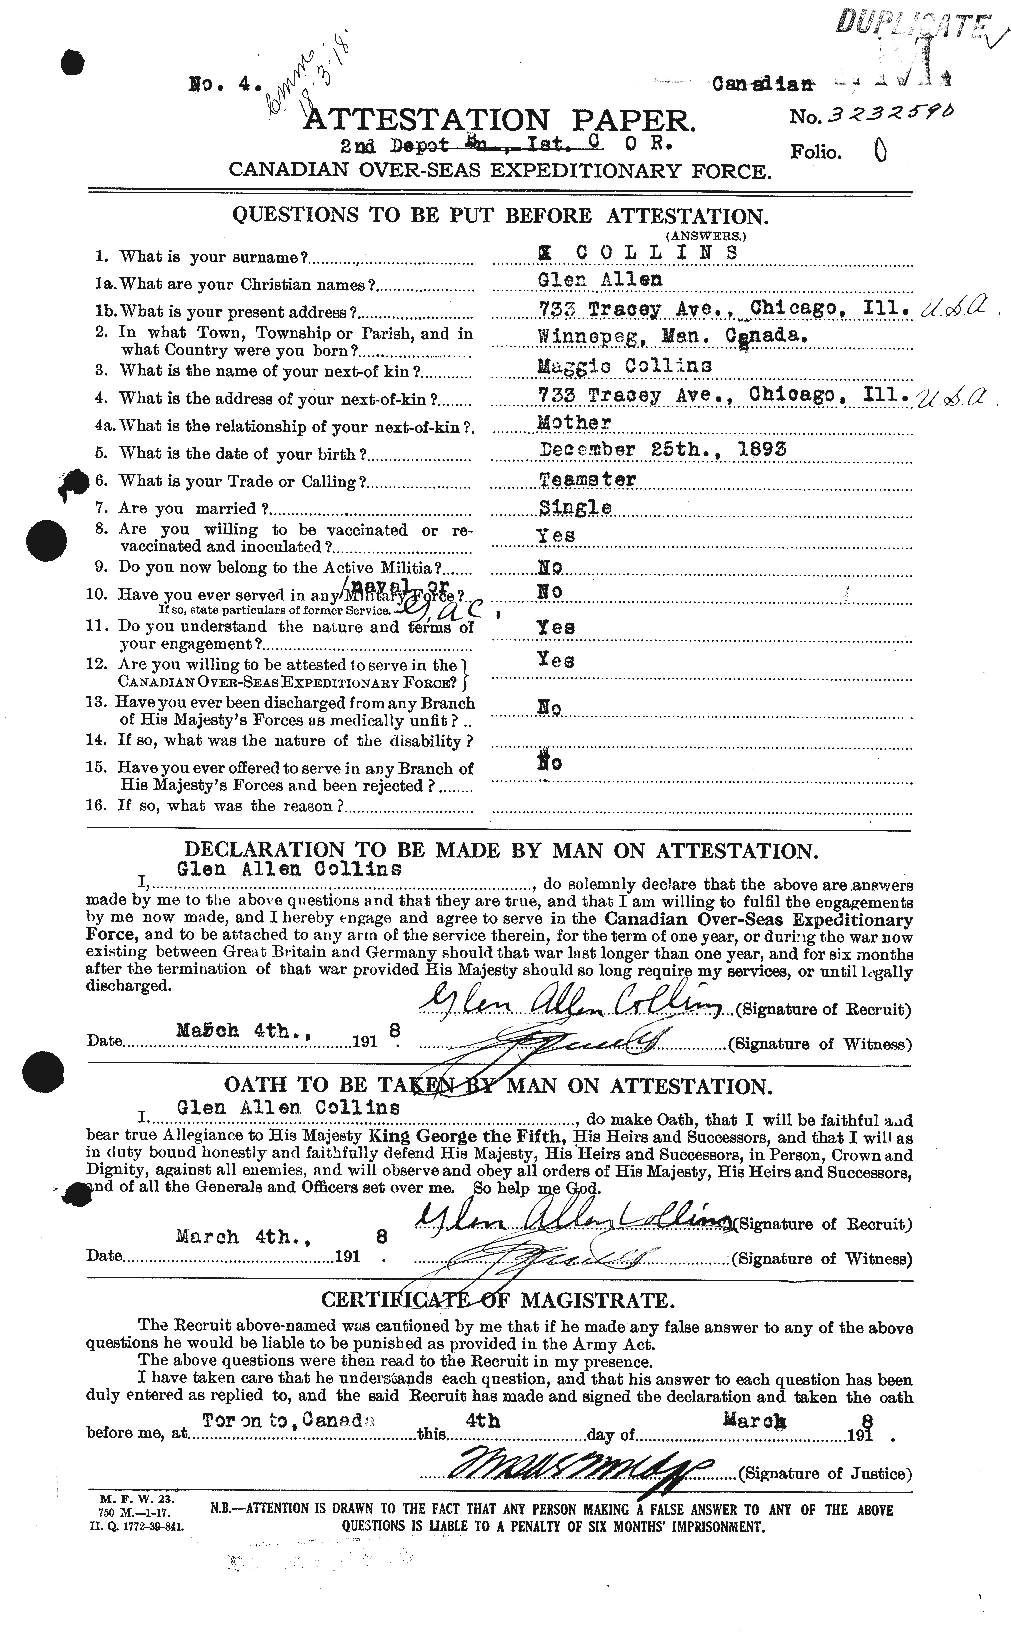 Personnel Records of the First World War - CEF 070525a